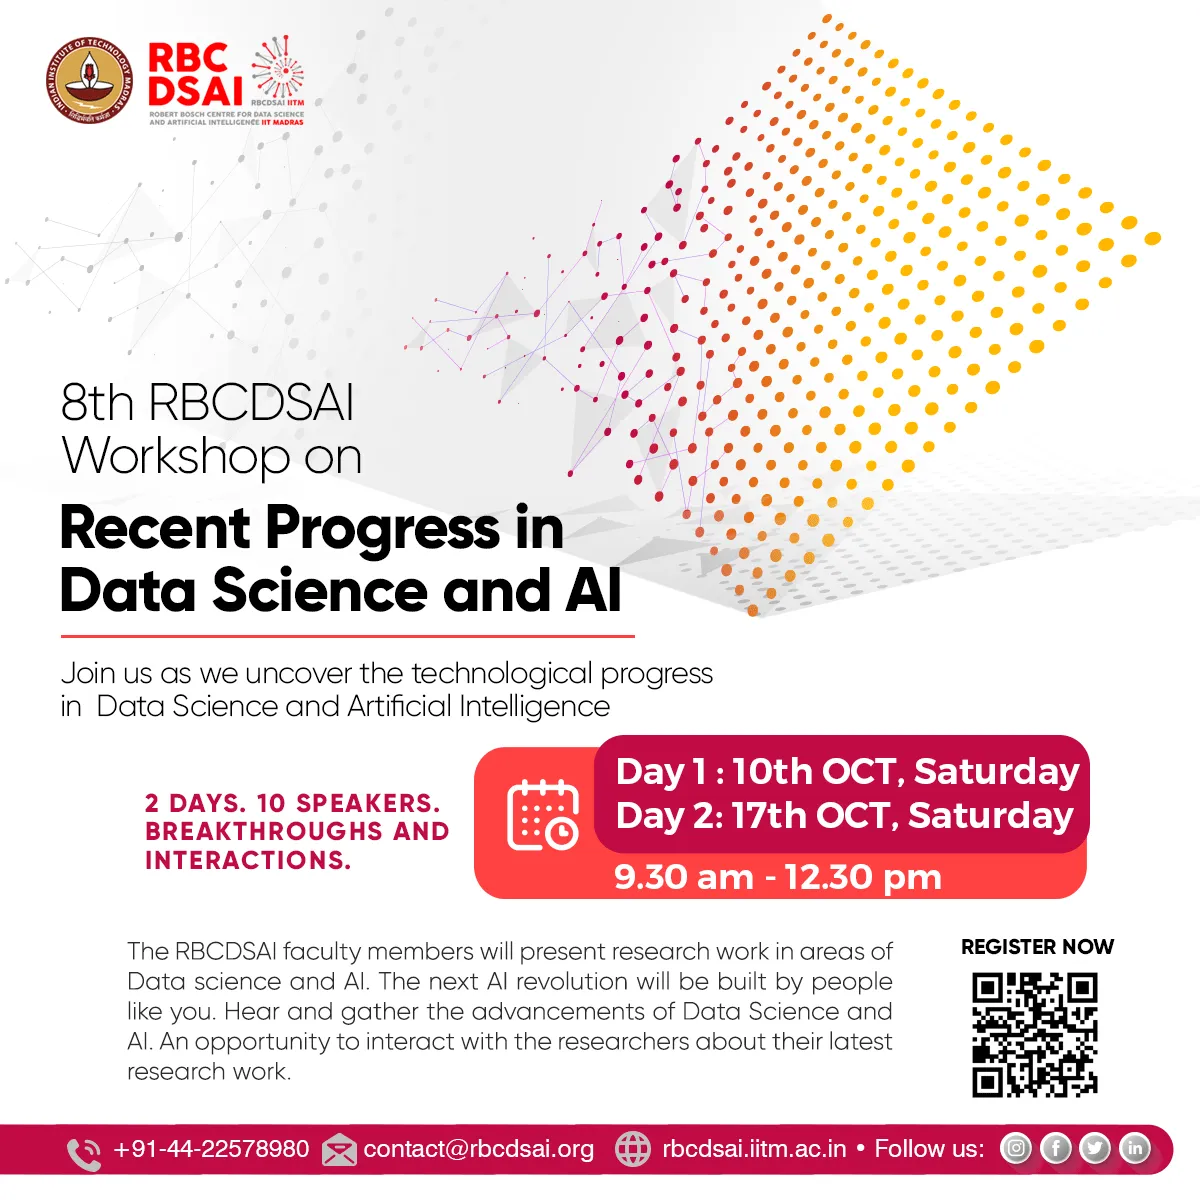 Eighth RBCDSAI Workshop on Recent Progress in Data Science and AI